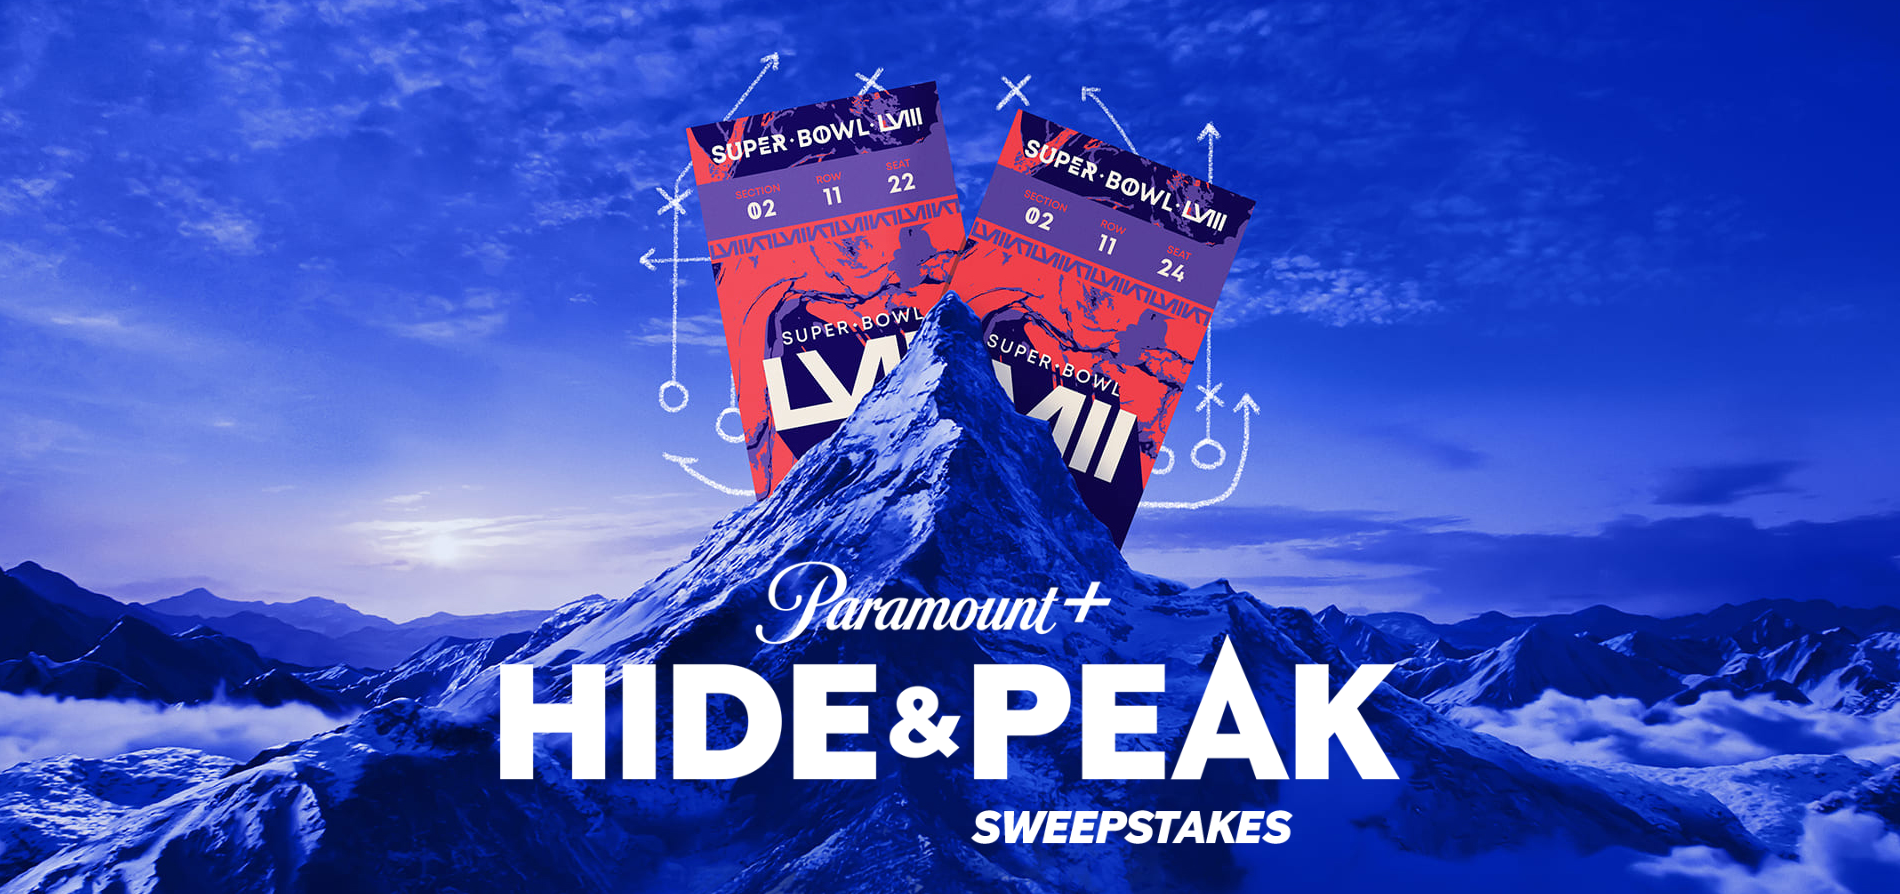 Enter Paramount+’s Hide & Peak Sweepstakes to Win Tickets to Super Bowl LVIII in Las Vegas